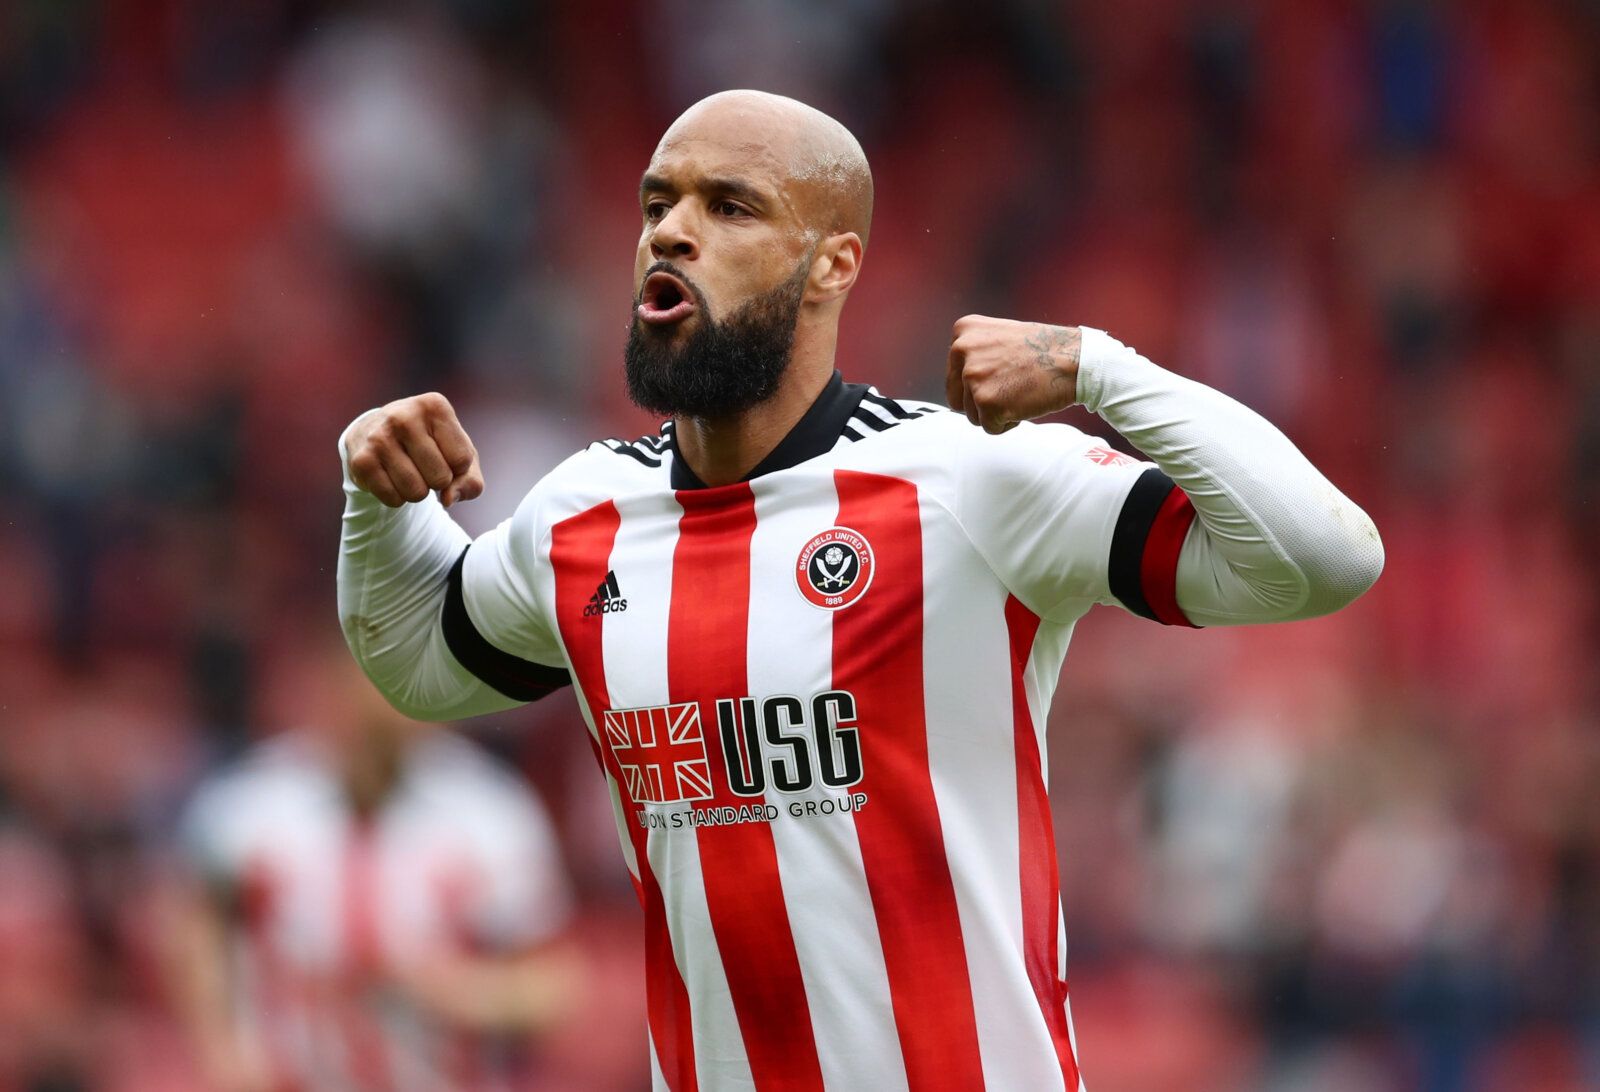 Soccer Football - Premier League - Sheffield United v Burnley - Bramall Lane, Sheffield, Britain - May 23, 2021 Burnley's David McGoldrick celebrates scoring their first goal Pool via REUTERS/Jan Kruger EDITORIAL USE ONLY. No use with unauthorized audio, video, data, fixture lists, club/league logos or 'live' services. Online in-match use limited to 75 images, no video emulation. No use in betting, games or single club /league/player publications.  Please contact your account representative for 